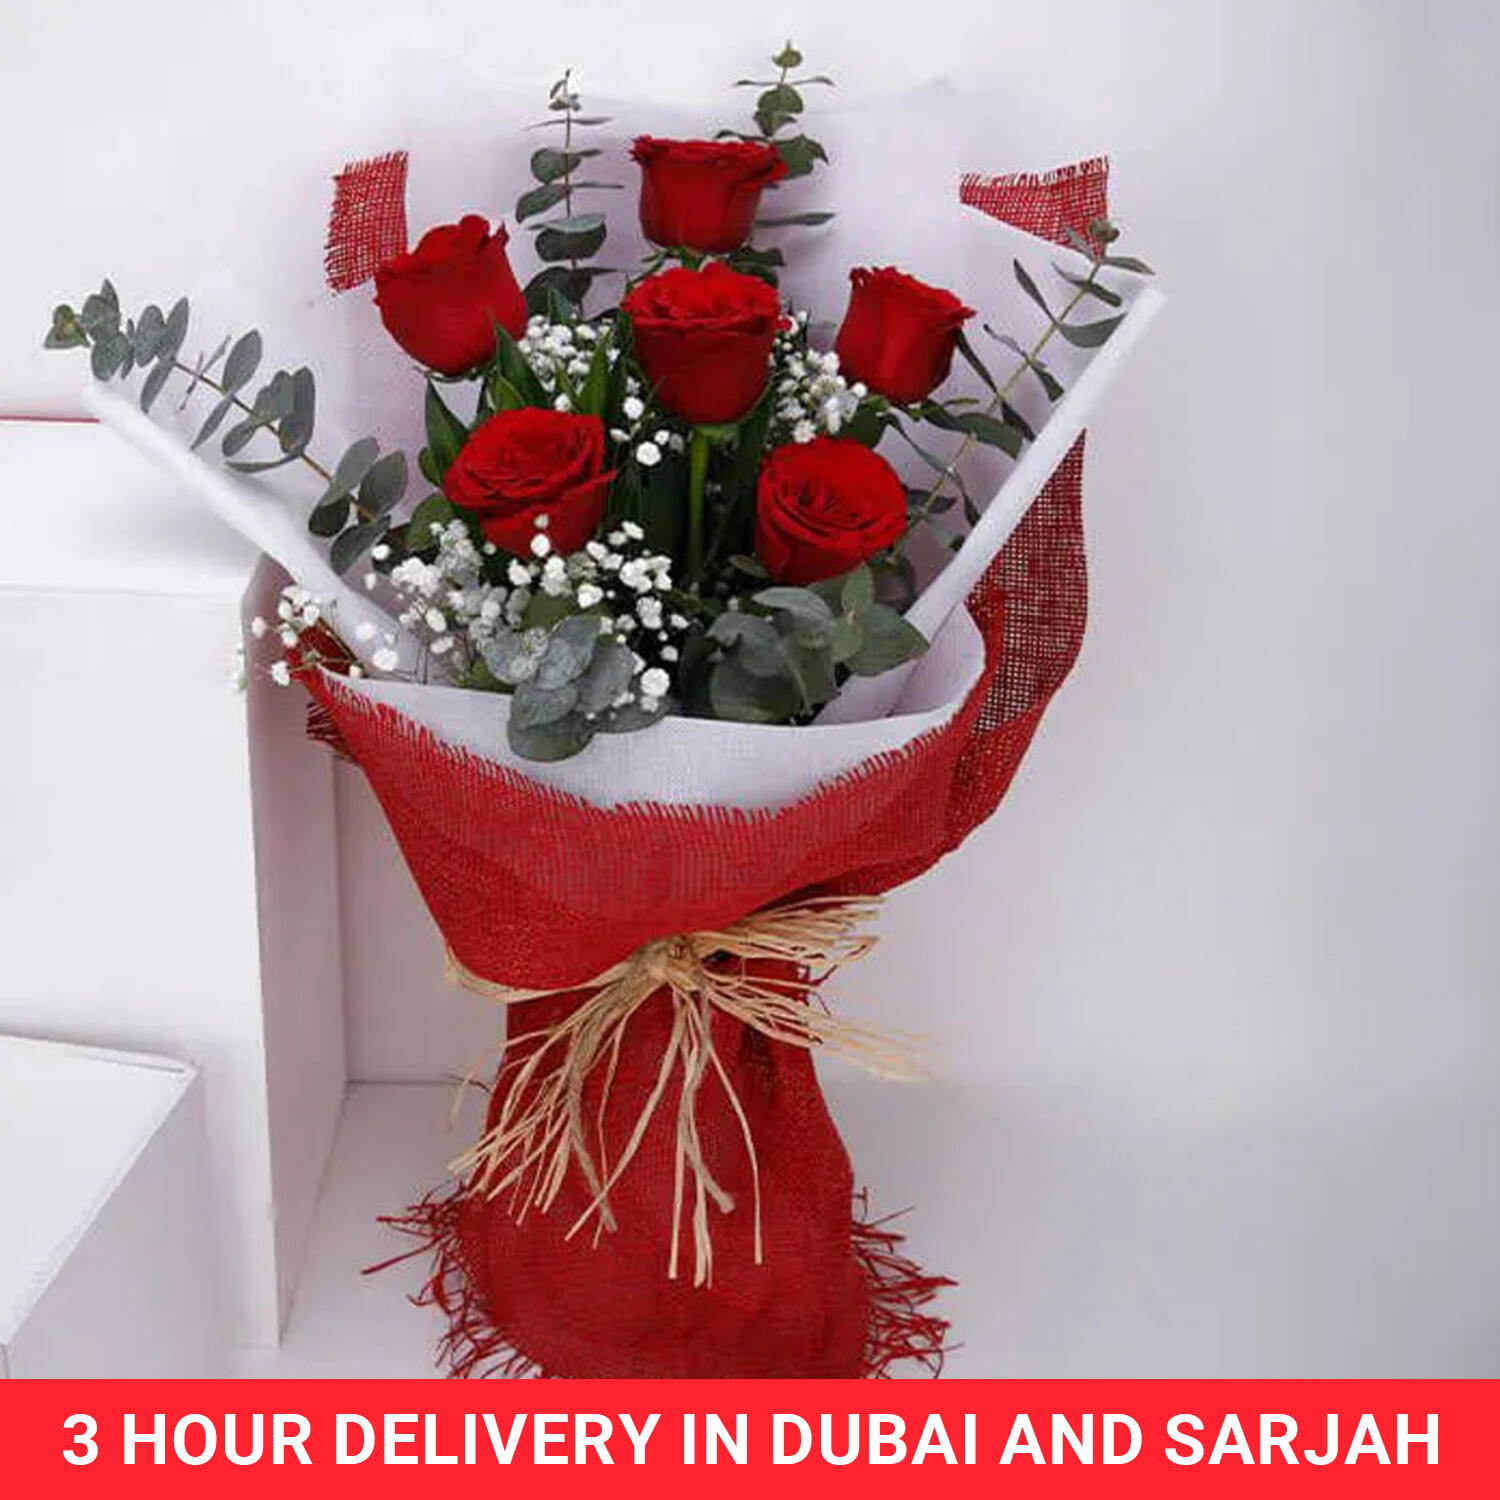 Surprise Birthday Gifts Delivery in Dubai@ Special Offers | Carmel Flowers